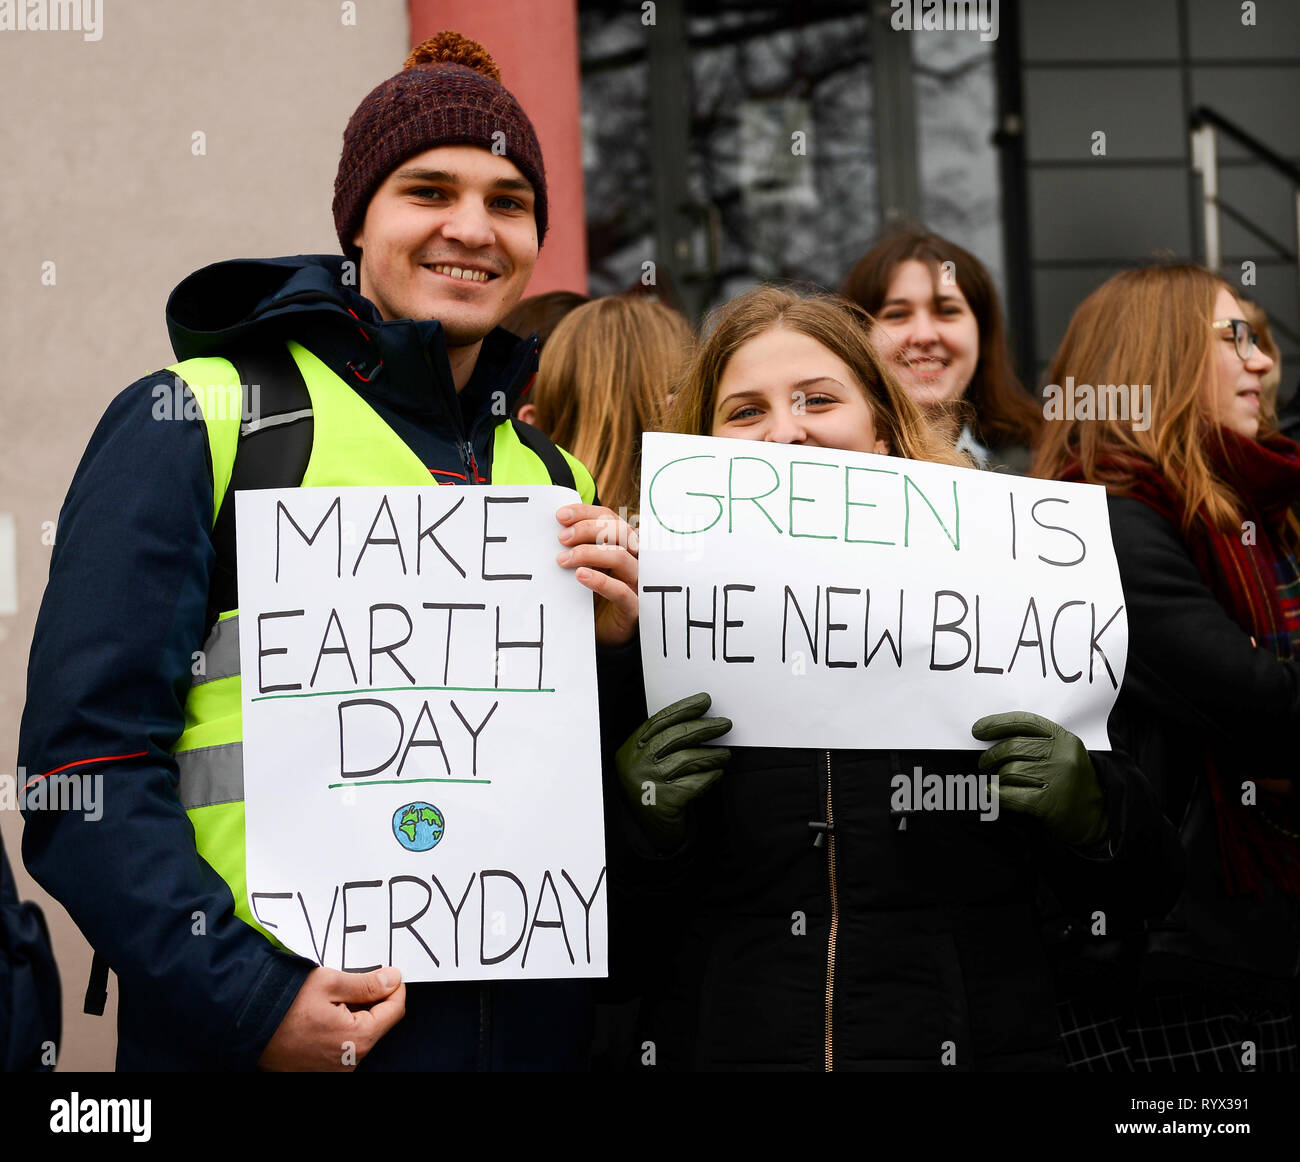 School students prostest against climate changes on March   15, 2019 in Belchatow, Poland. Stock Photo